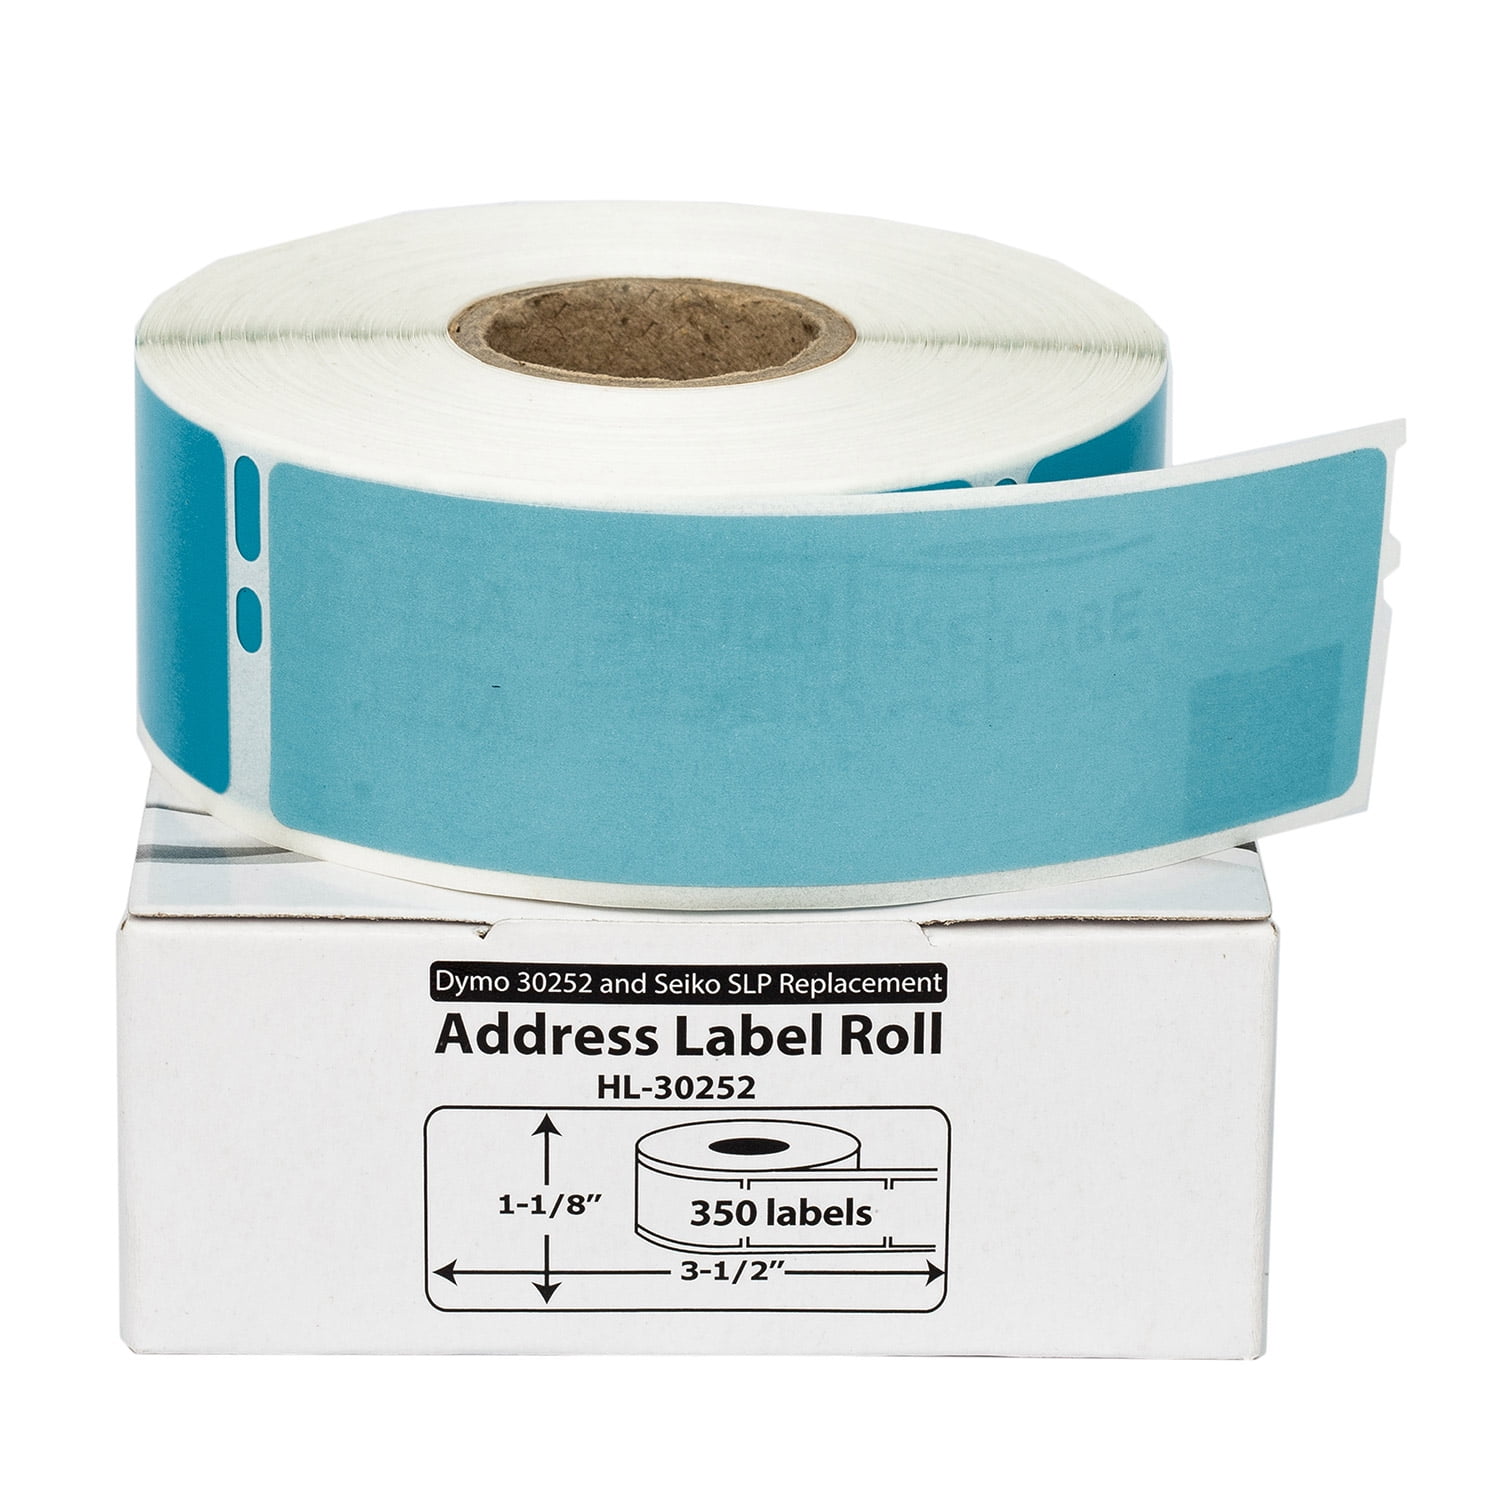 10Rolls OF 350 Address Labels in Mini-Cartons For DYMO LabelWriters 30252 CoStar 